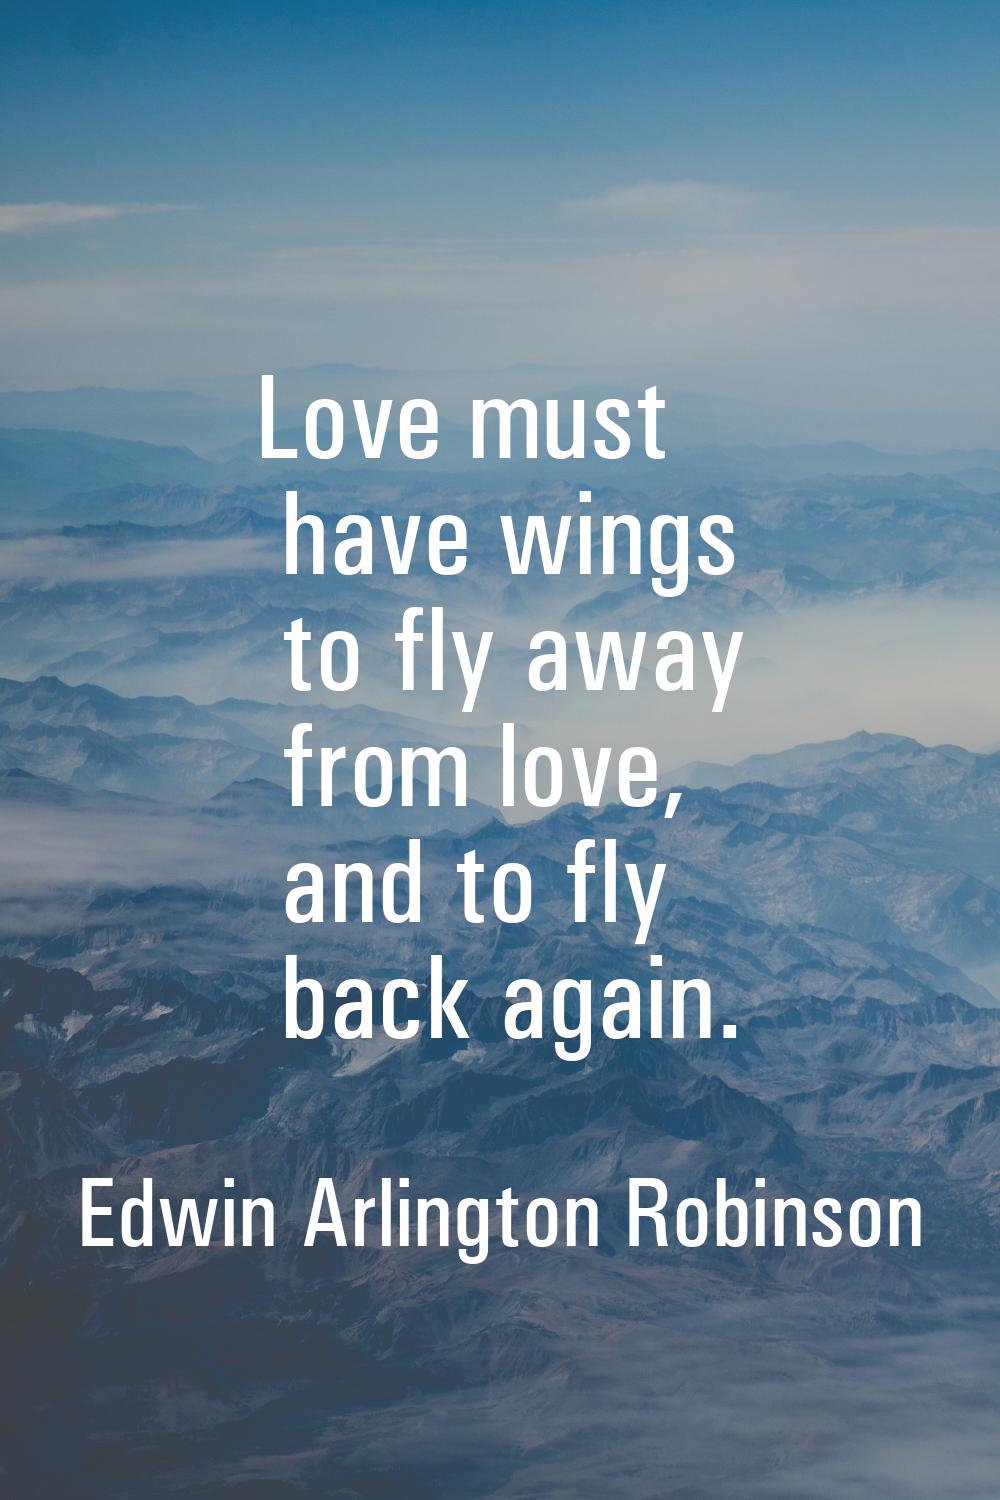 Love must have wings to fly away from love, and to fly back again.